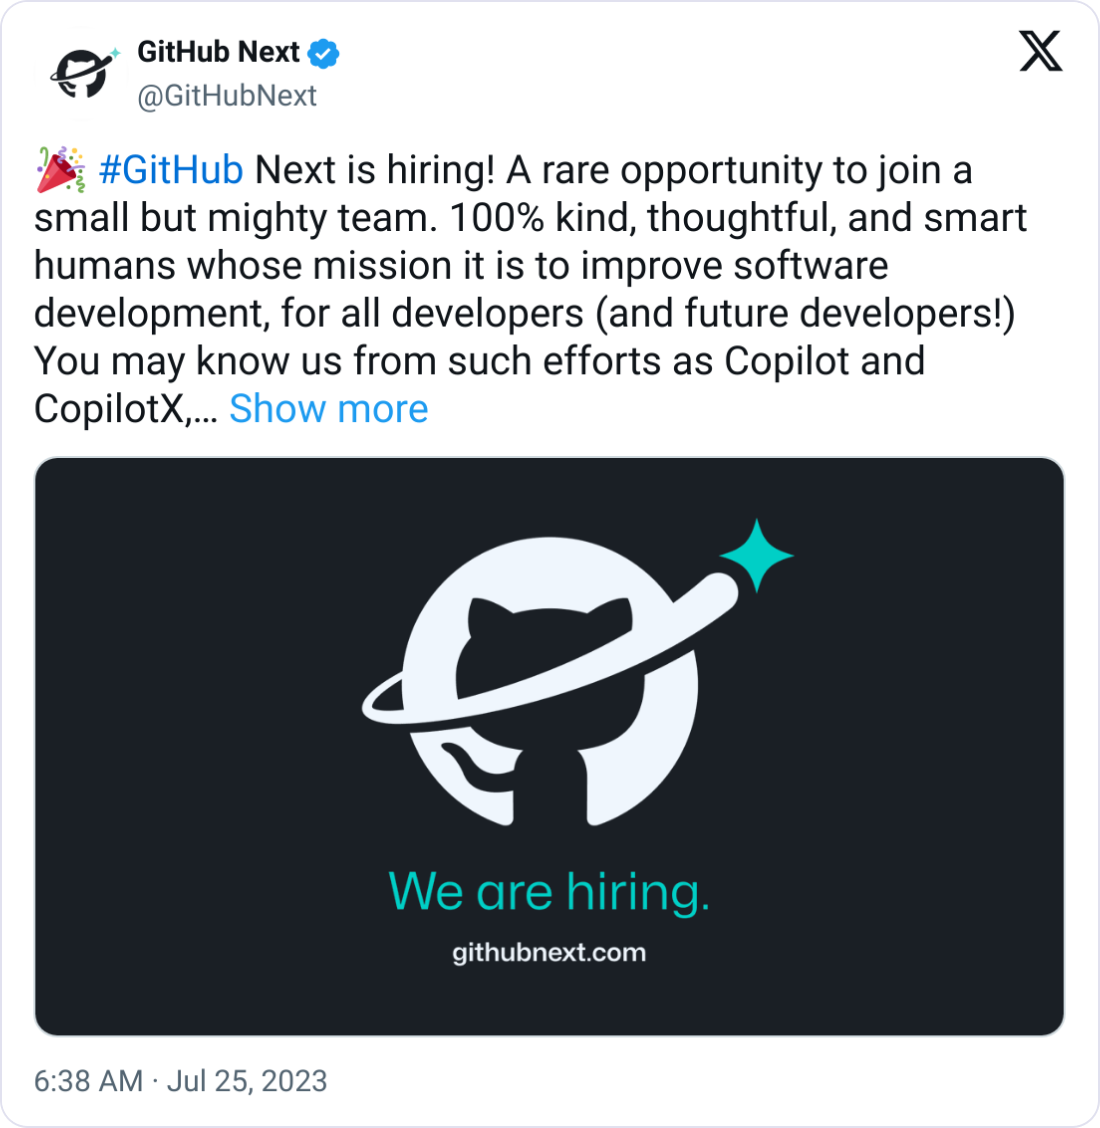 GitHub Next @GitHubNext 🎉 #GitHub Next is hiring! A rare opportunity to join a small but mighty team. 100% kind, thoughtful, and smart humans whose mission it is to improve software development, for all developers (and future developers!) You may know us from such efforts as Copilot and CopilotX, though we do not limit ourselves to research on AI things. It's just another tool in the toolbox.  https://boards.greenhouse.io/github/jobs/5142434  We're a team that has the agency of a startup, the resources of a GitHub, and broad latitude to define what we investigate.